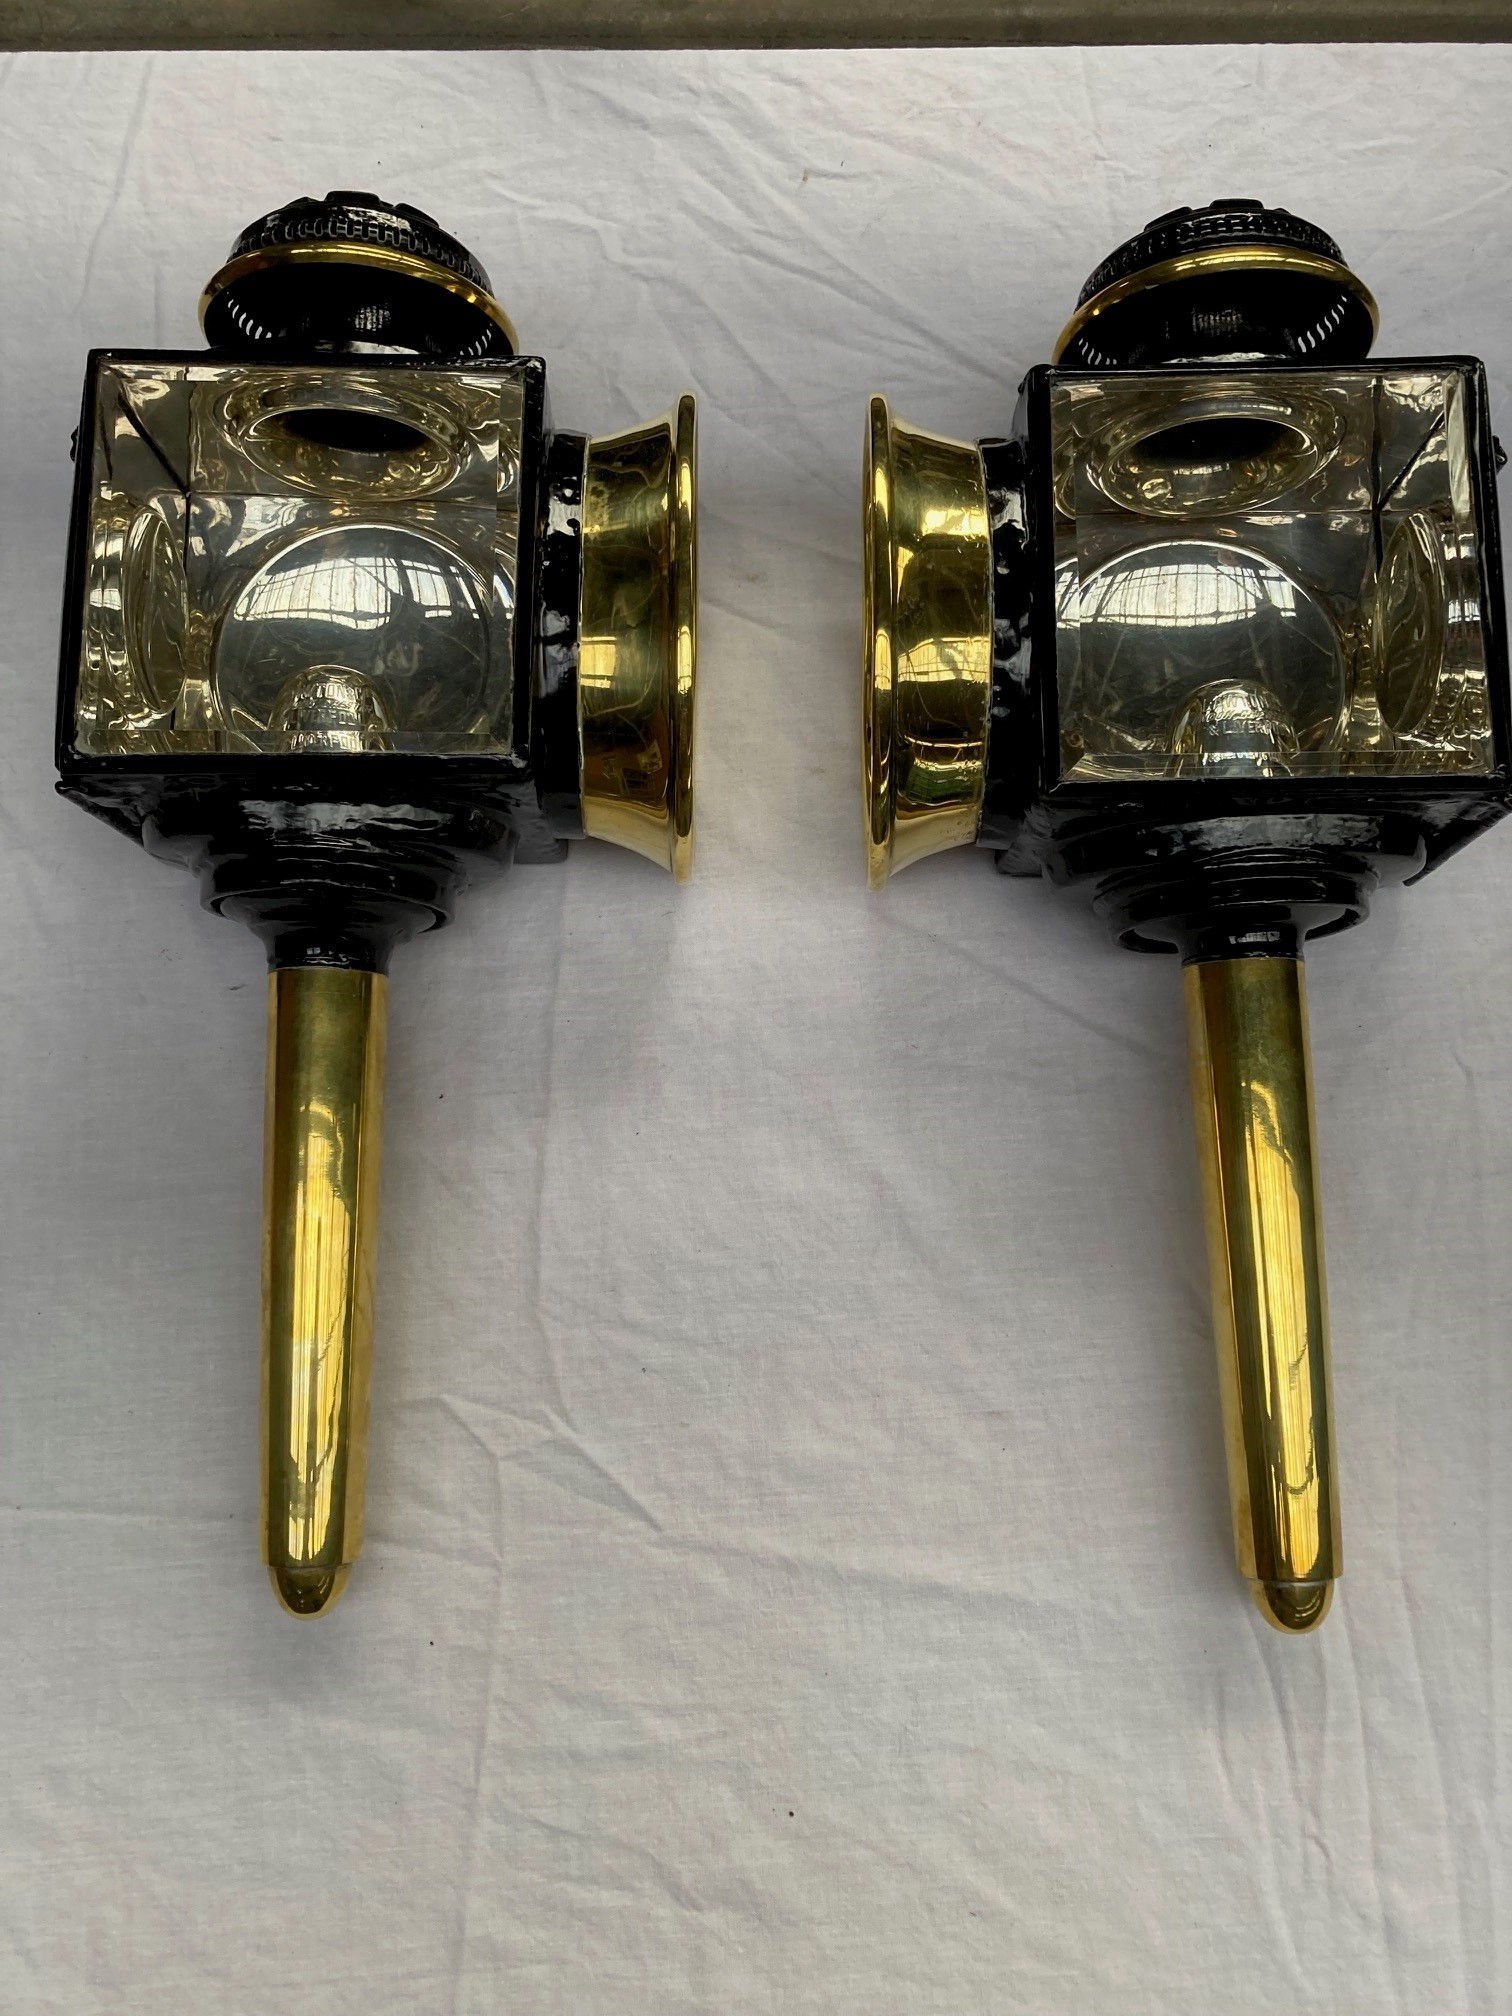 Pair of oval fronted lamps and rear lamp with bracket, by Lawton. - Image 3 of 5